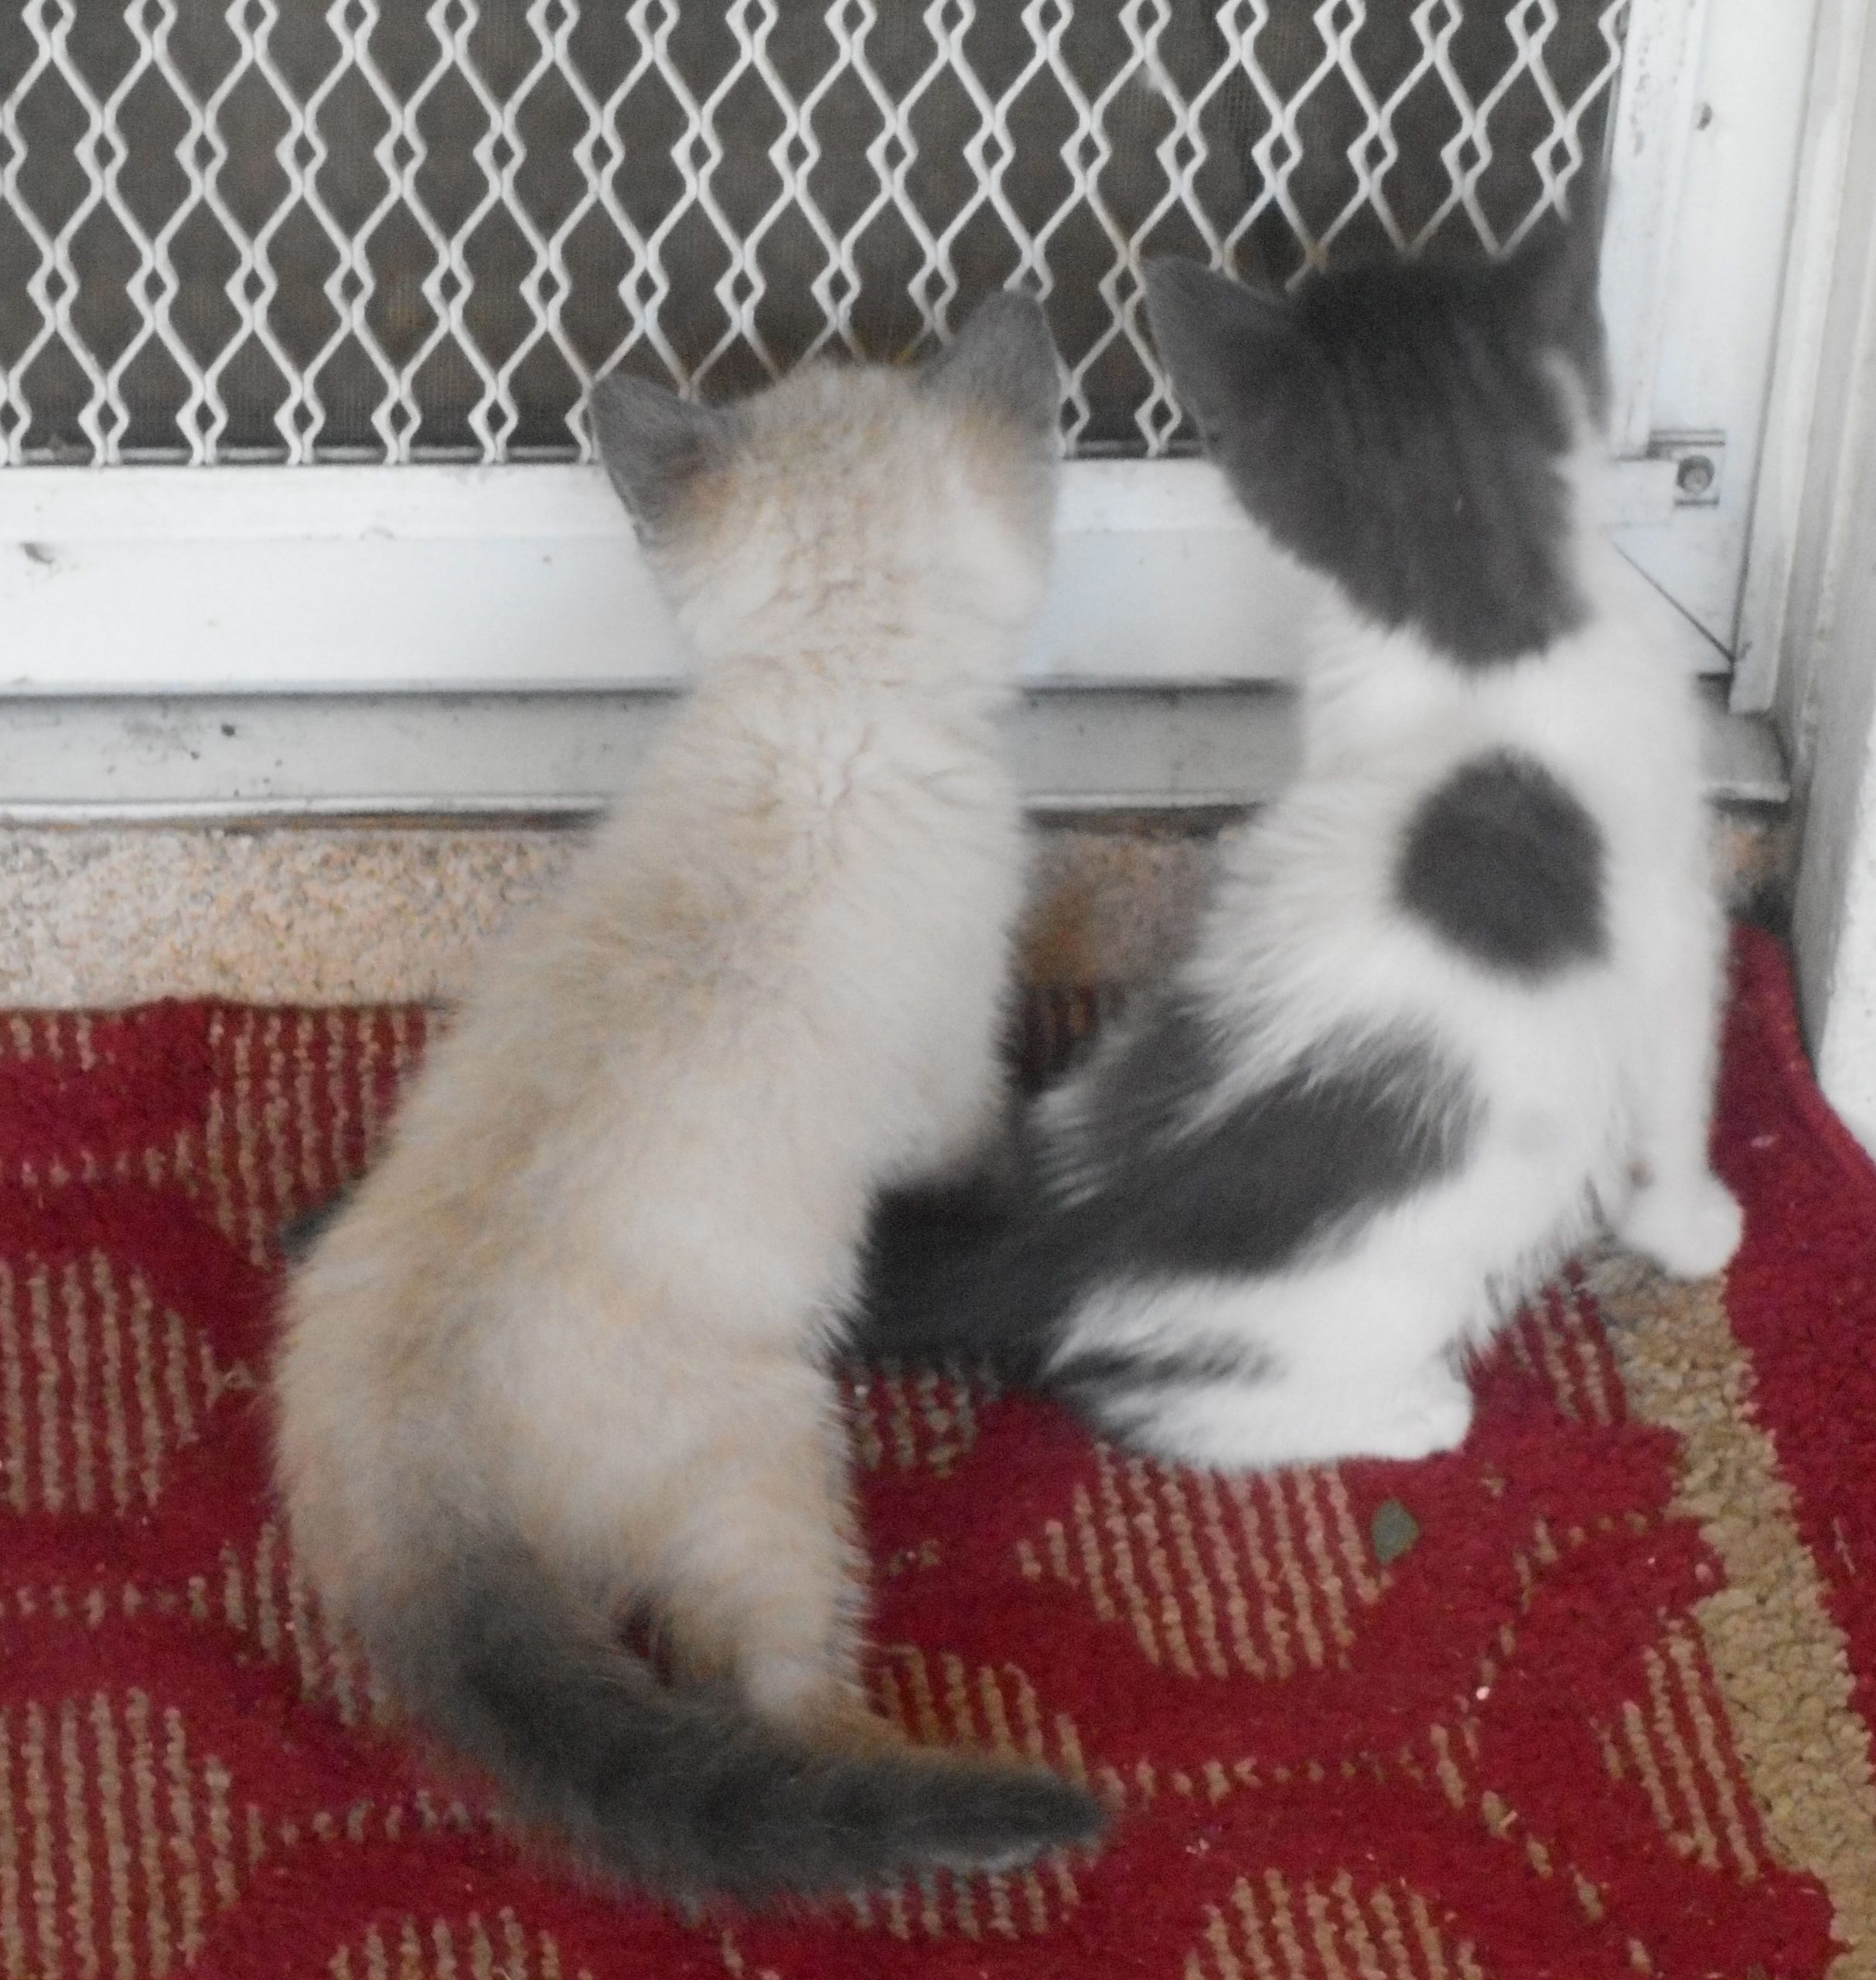 Sam and Teddy looking inside through the screen door. Teddy and Sam. Teddy left is a beige shade with dark ears, face, paws and tail. Sam right is white and gray. They are brothers who love to play.